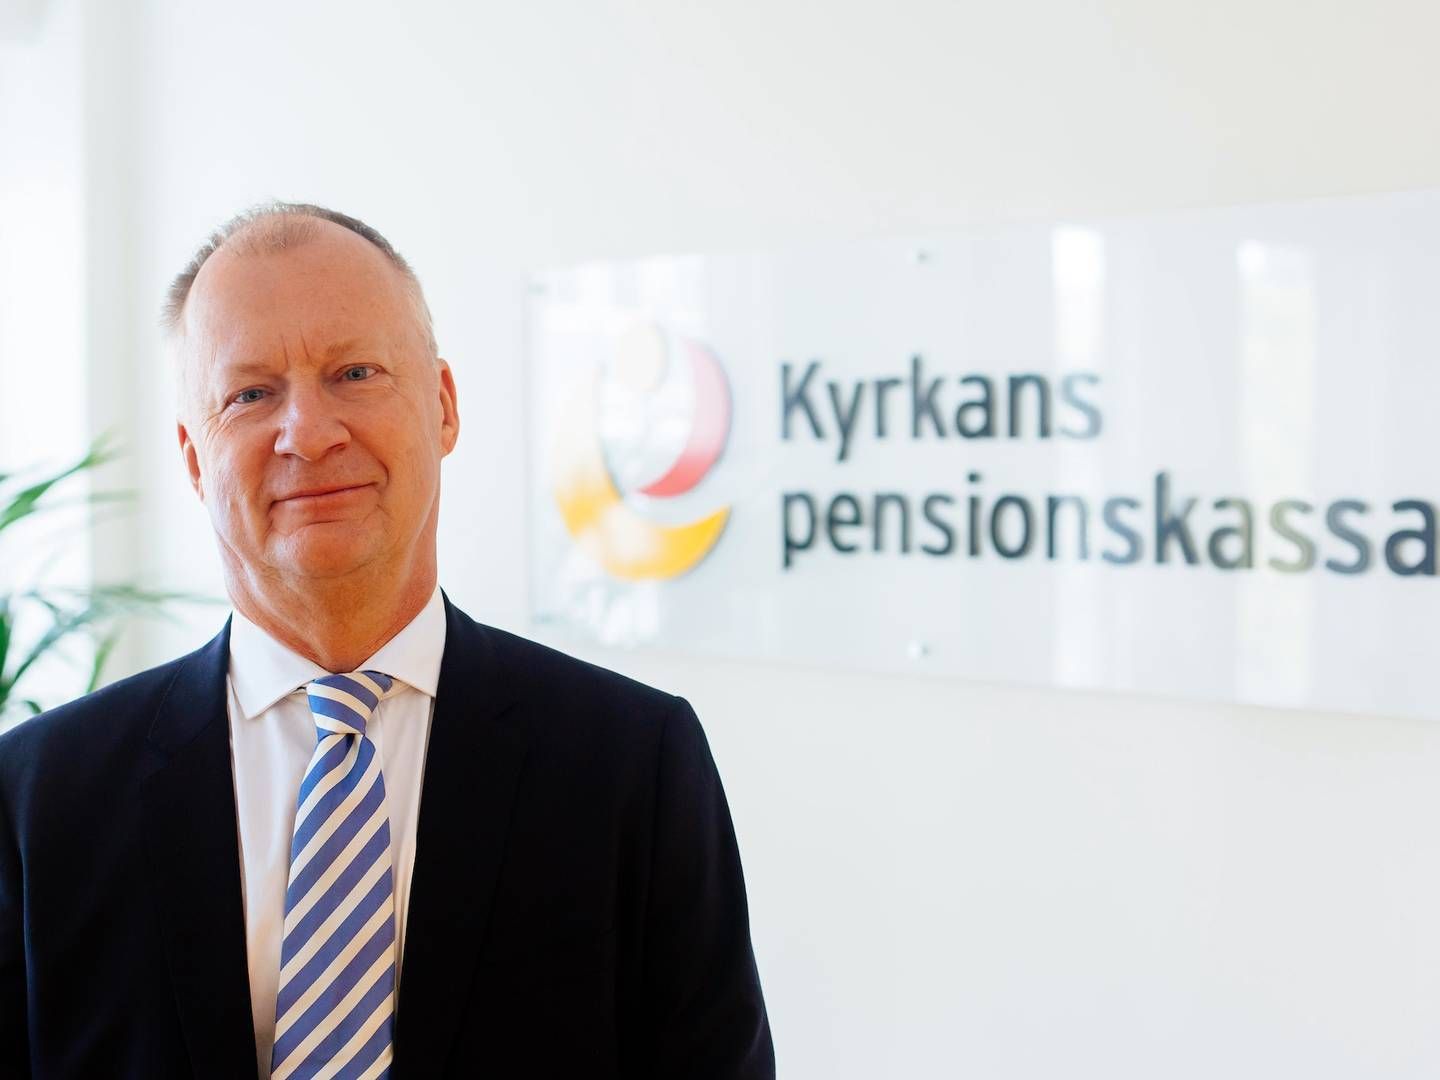 Carl Cederberg is the CEO of the pension fund of the Church of Sweden. | Photo: Kyrkans Pension / PR